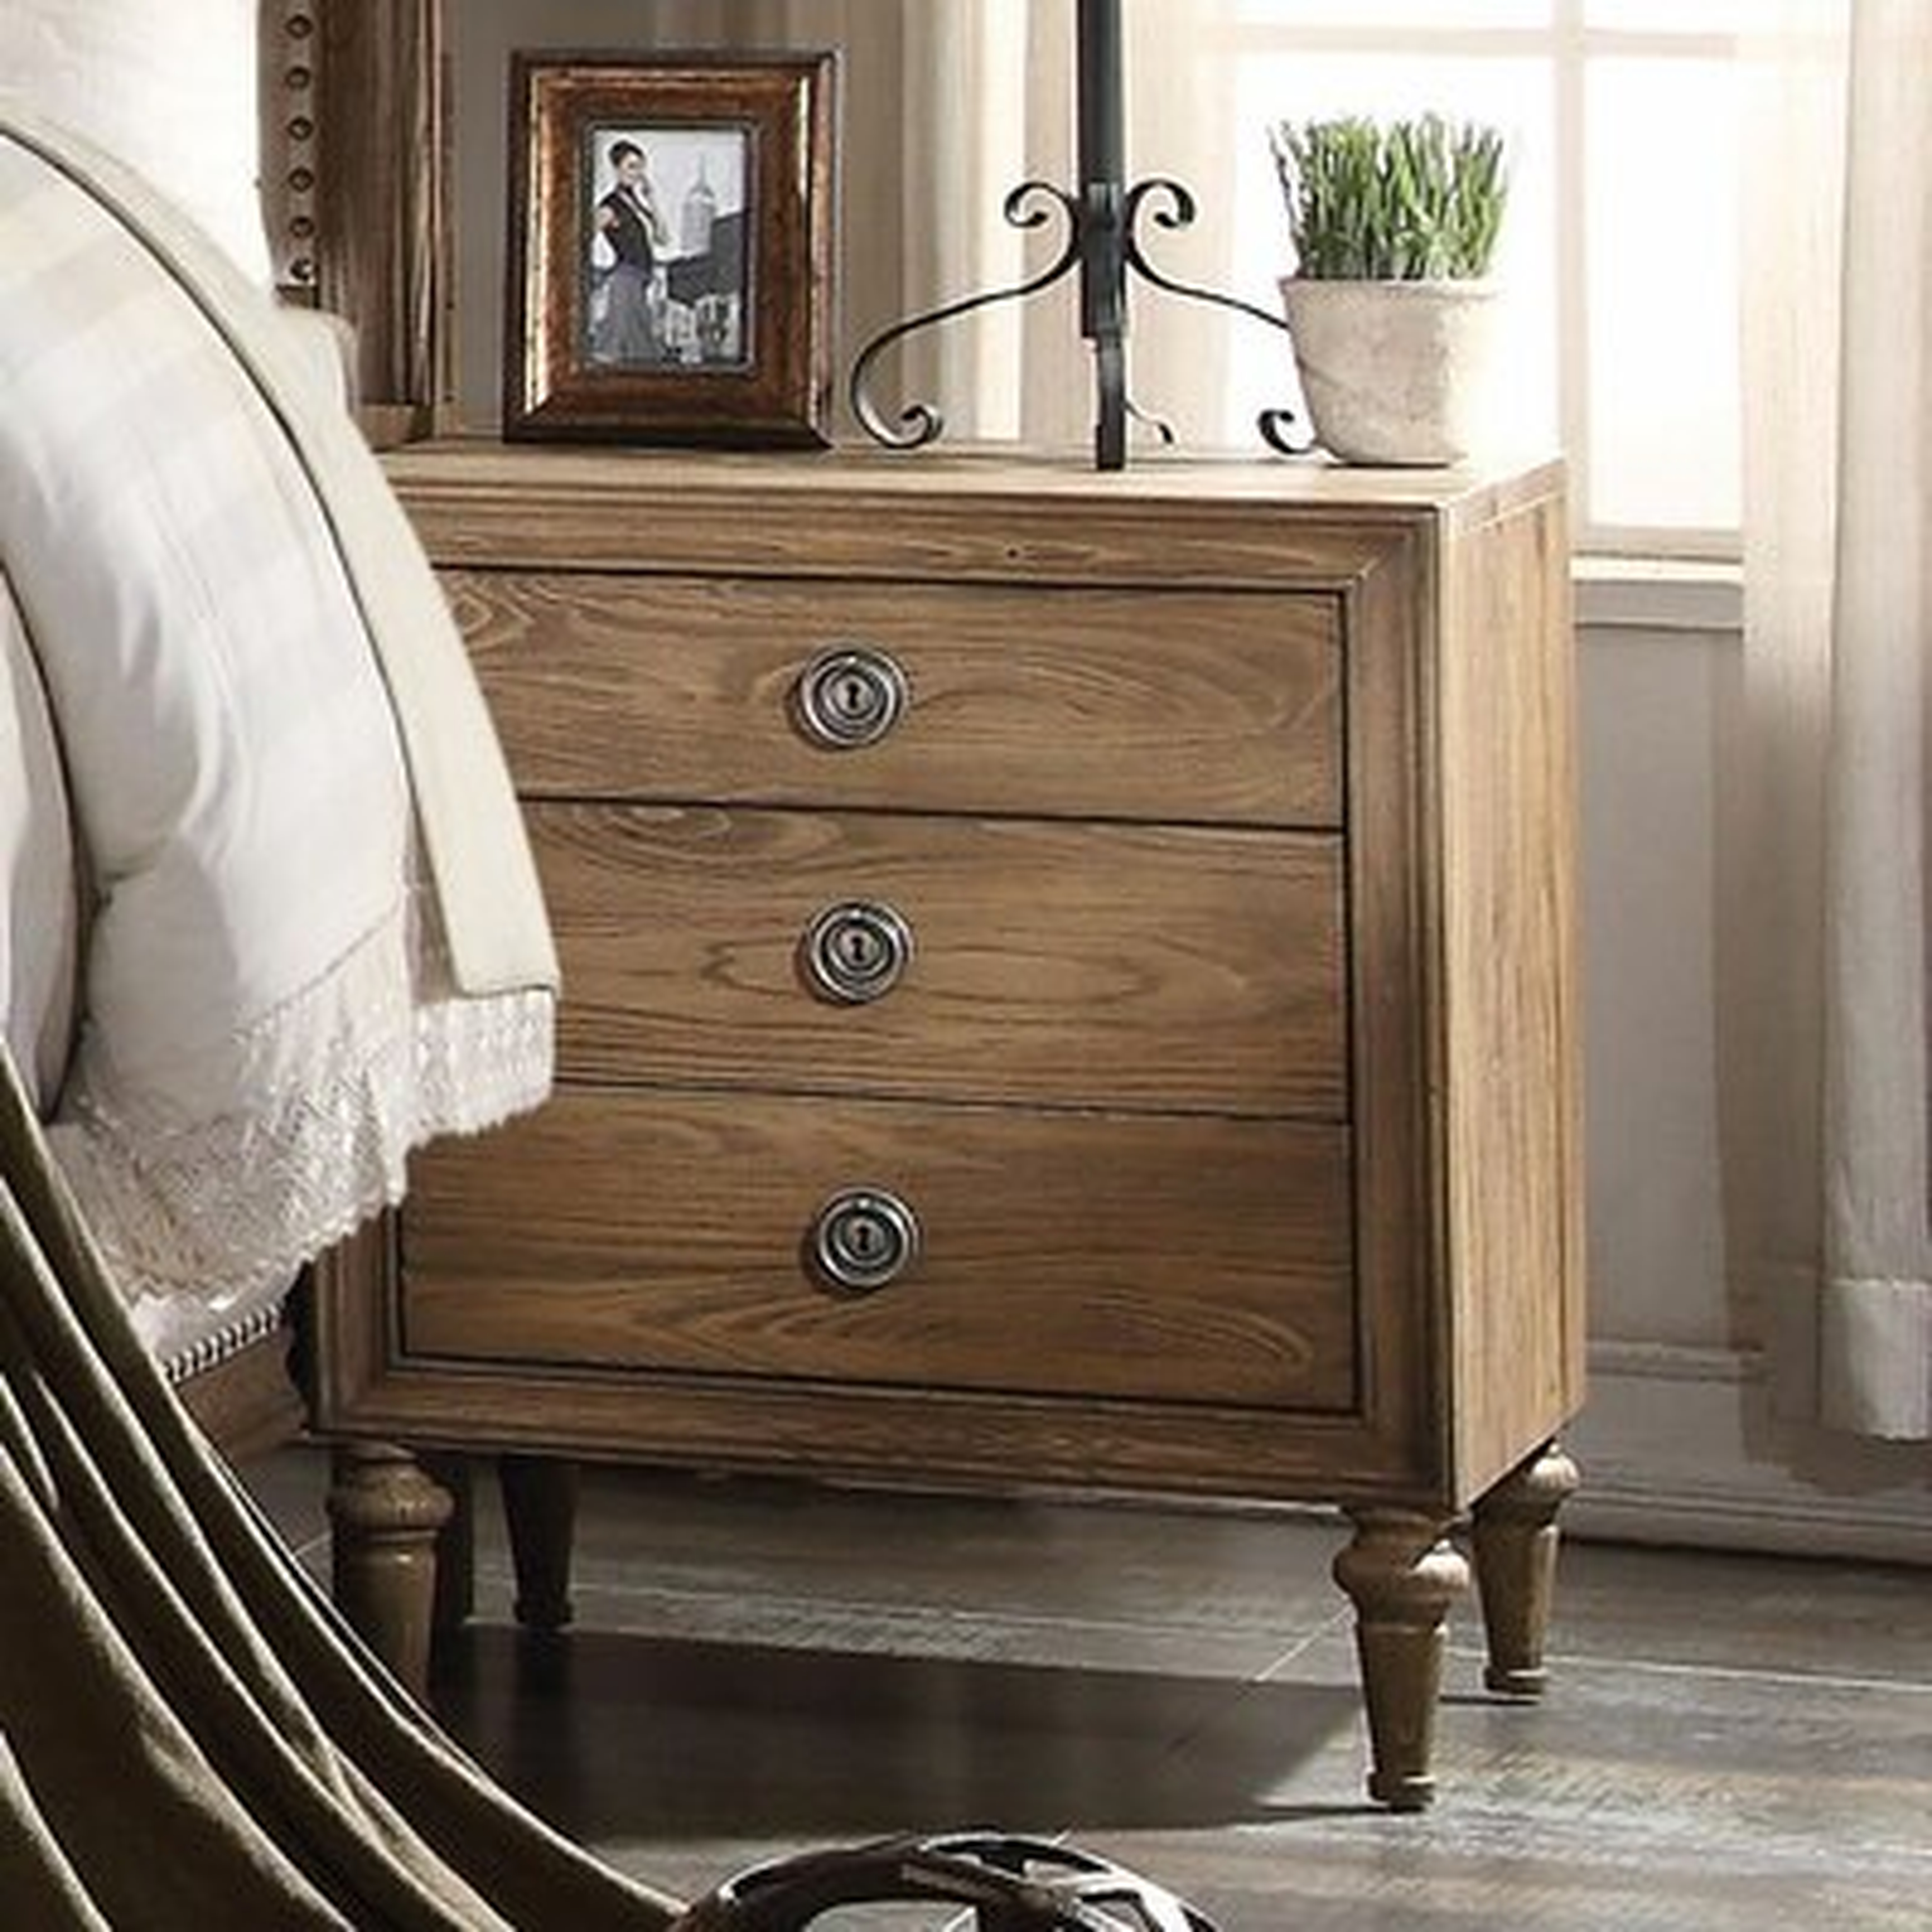 ACME Inverness Nightstand In Reclaimed Oak FF80A0EFC9C940E9990F1BFB62960722 - Wayfair